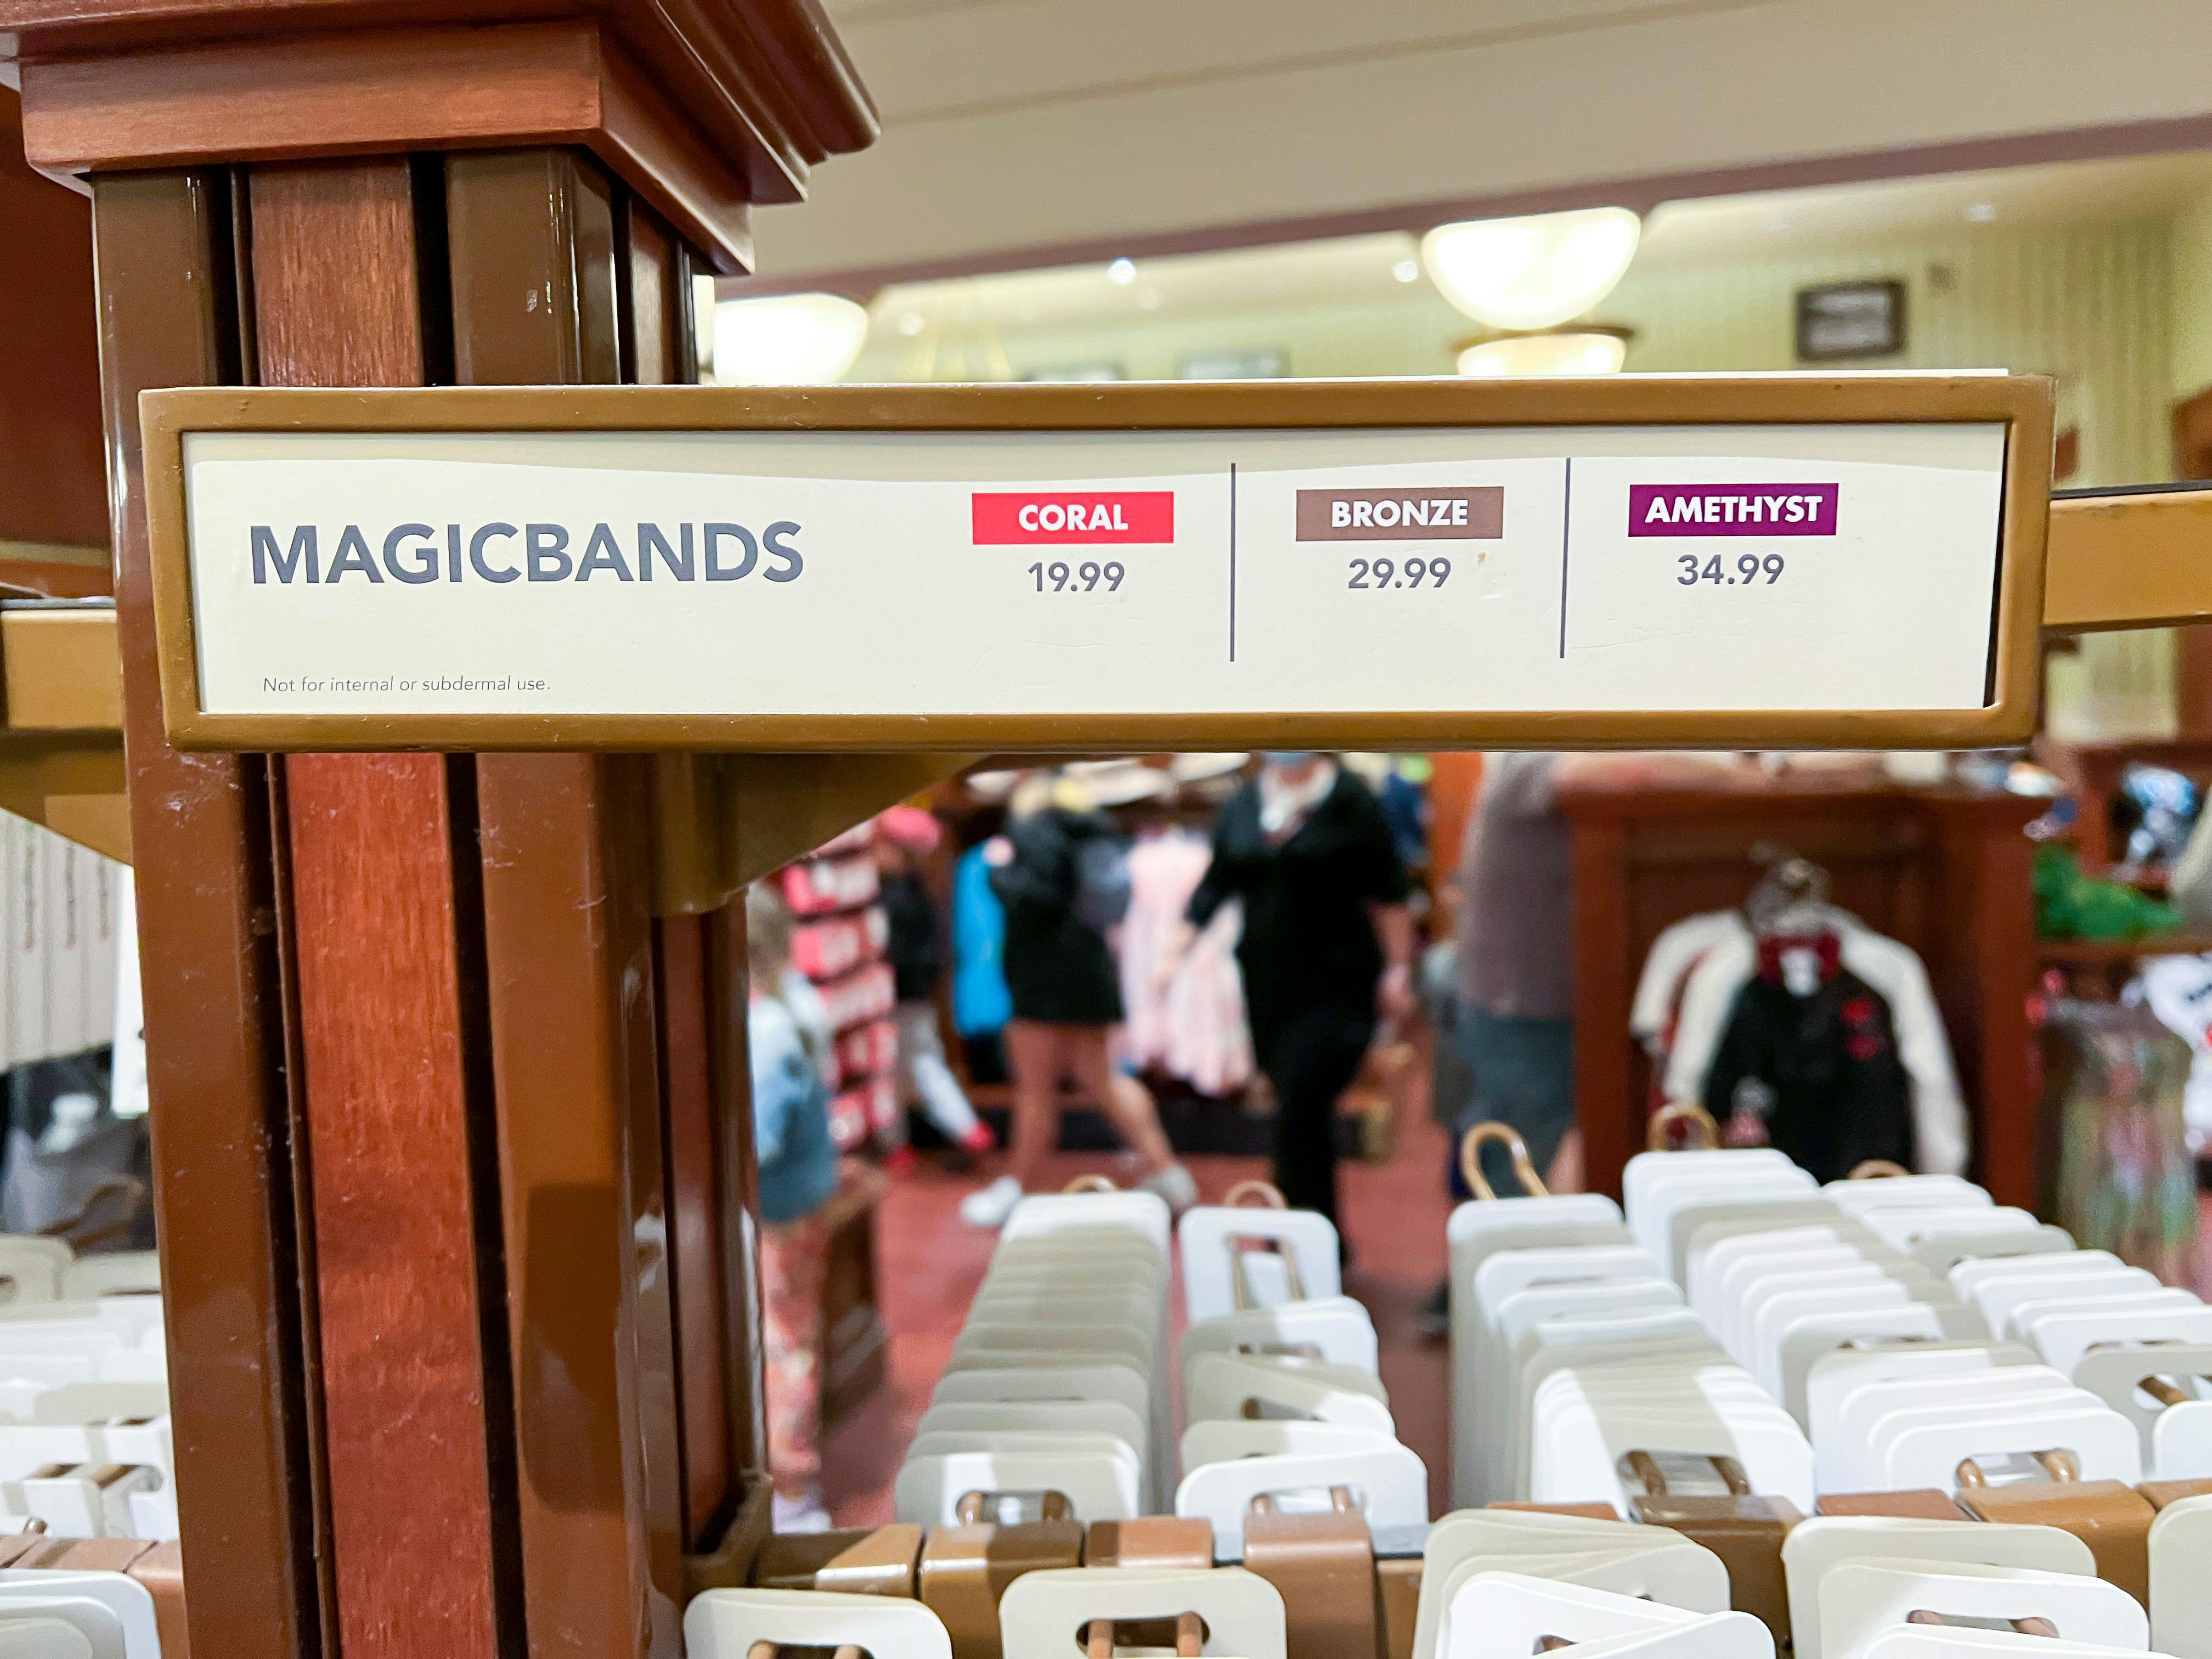 A shelf inside a Disney World store with MagicBands, and a sign showing the prices for each kind.